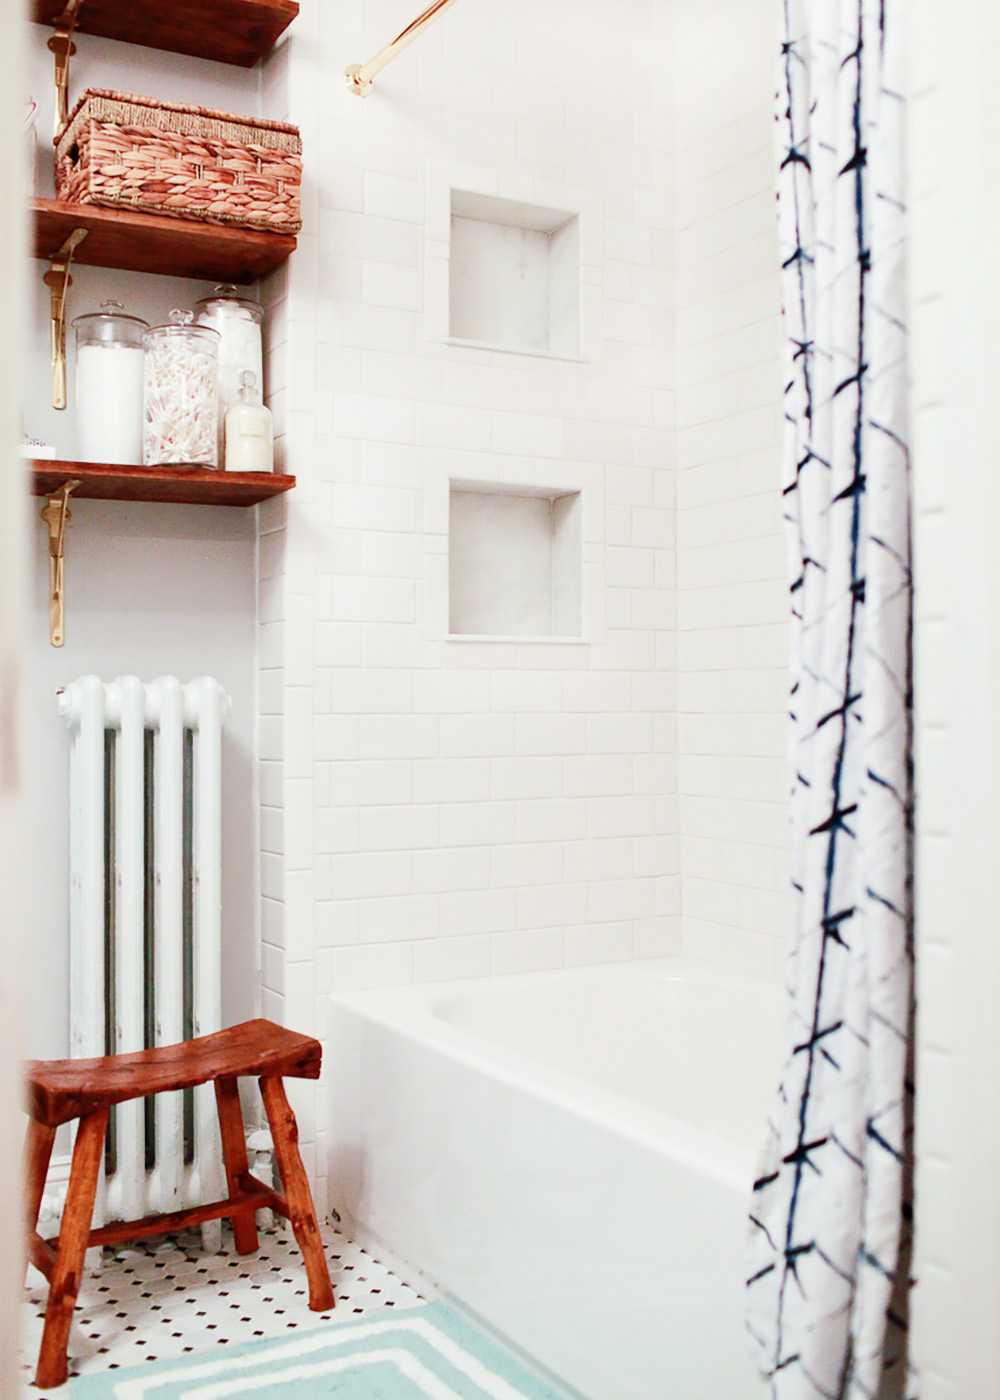 How To Retile A Bathroom For Bright, Can You Retile Your Own Bathroom